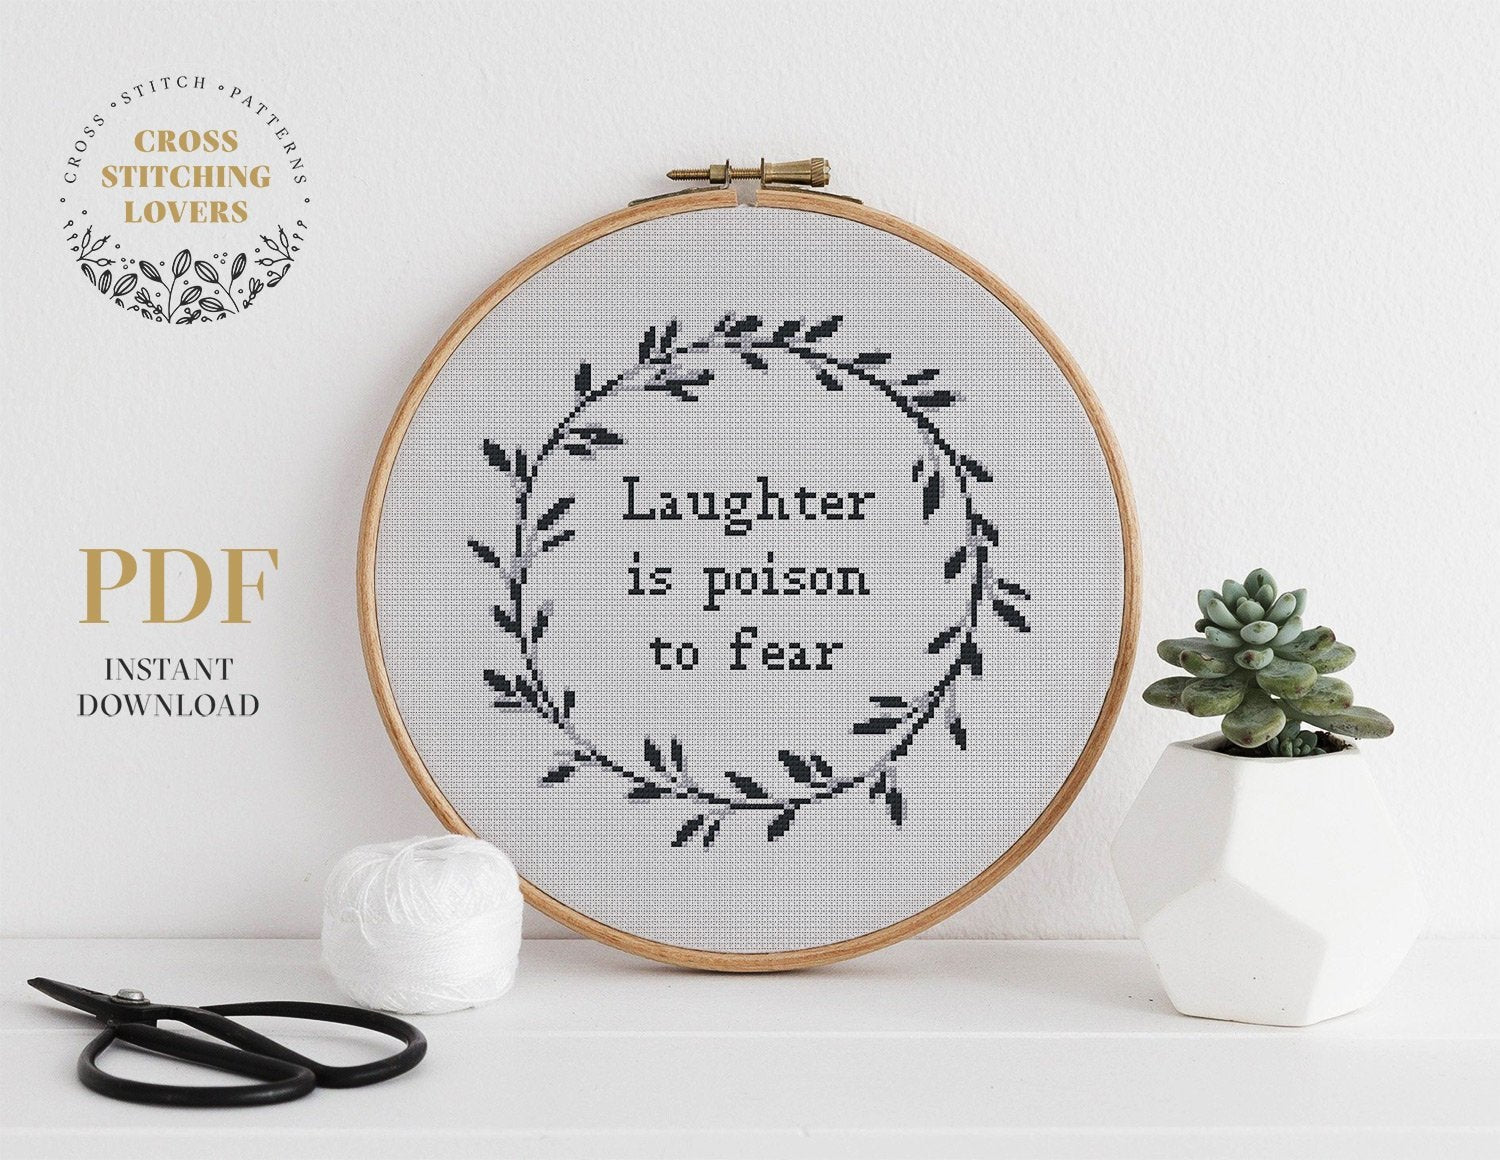 Laughter is poison to fear - Cross stitch pattern